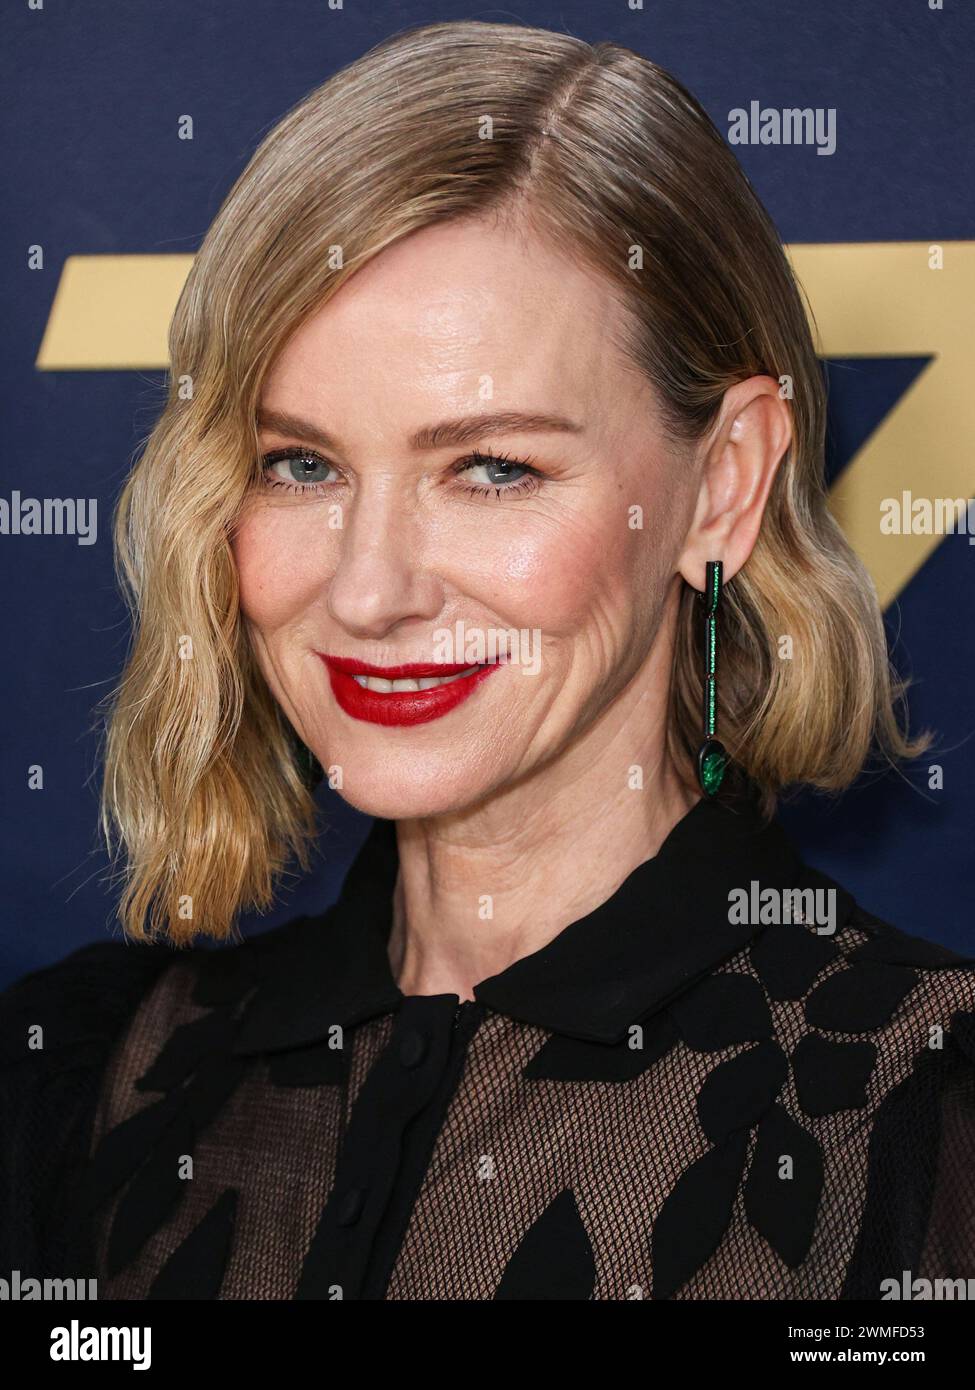 LOS ANGELES, CALIFORNIA, USA - FEBRUARY 24: Naomi Watts arrives at the 30th Annual Screen Actors Guild Awards held at the Shrine Auditorium and Expo Hall on February 24, 2024 in Los Angeles, California, United States. (Photo by Xavier Collin/Image Press Agency) Stock Photo